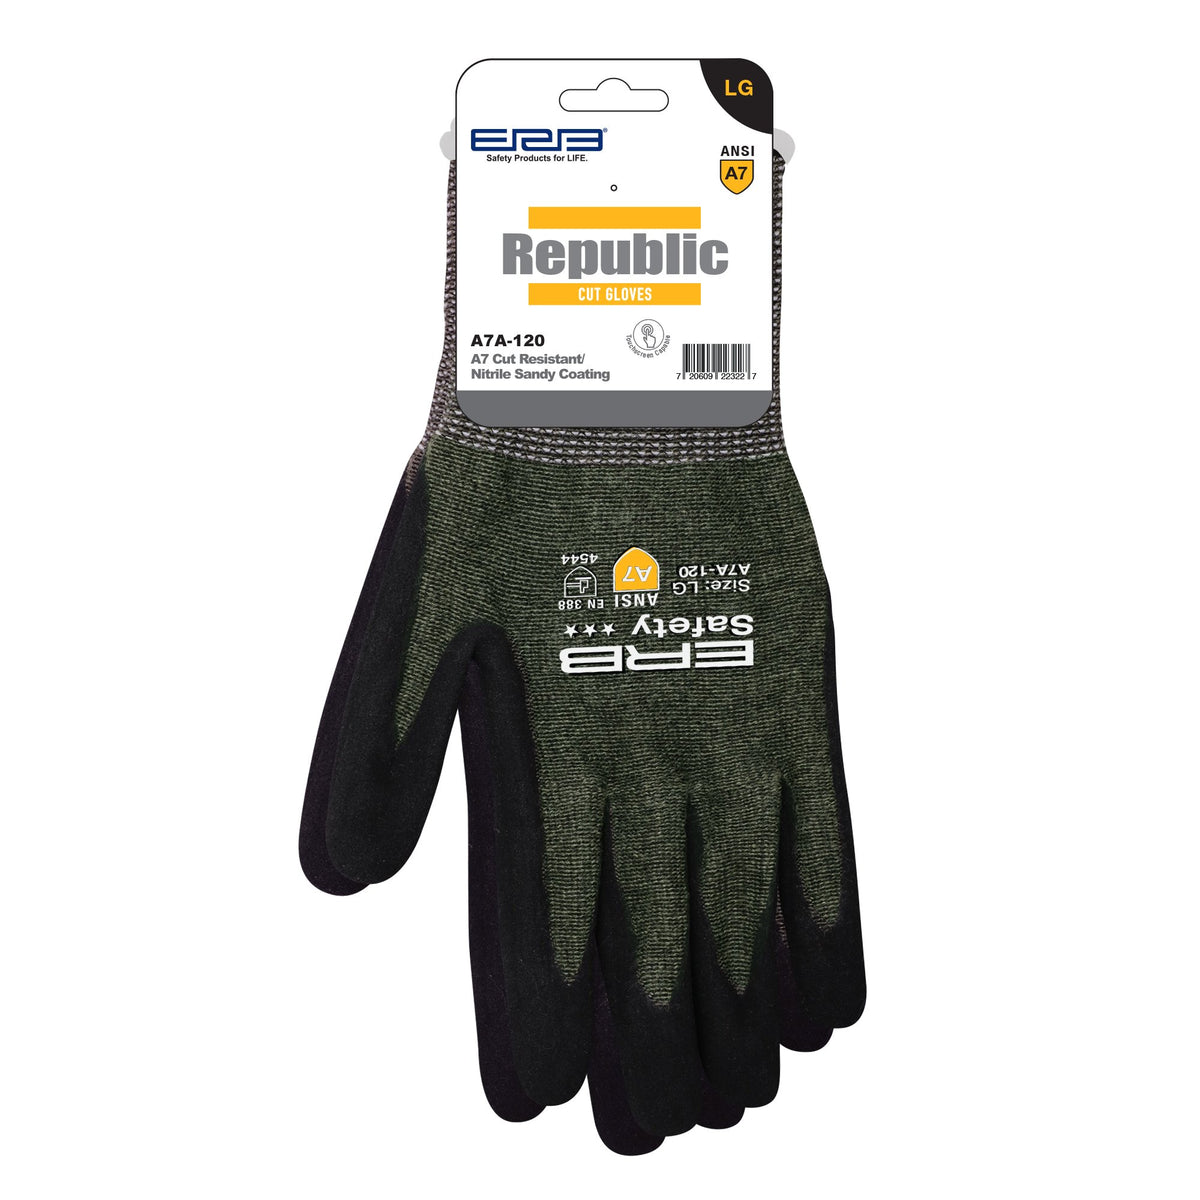 A7A-120 HPPE Cut Glove with Nitrile Sandy Coating 12 pair